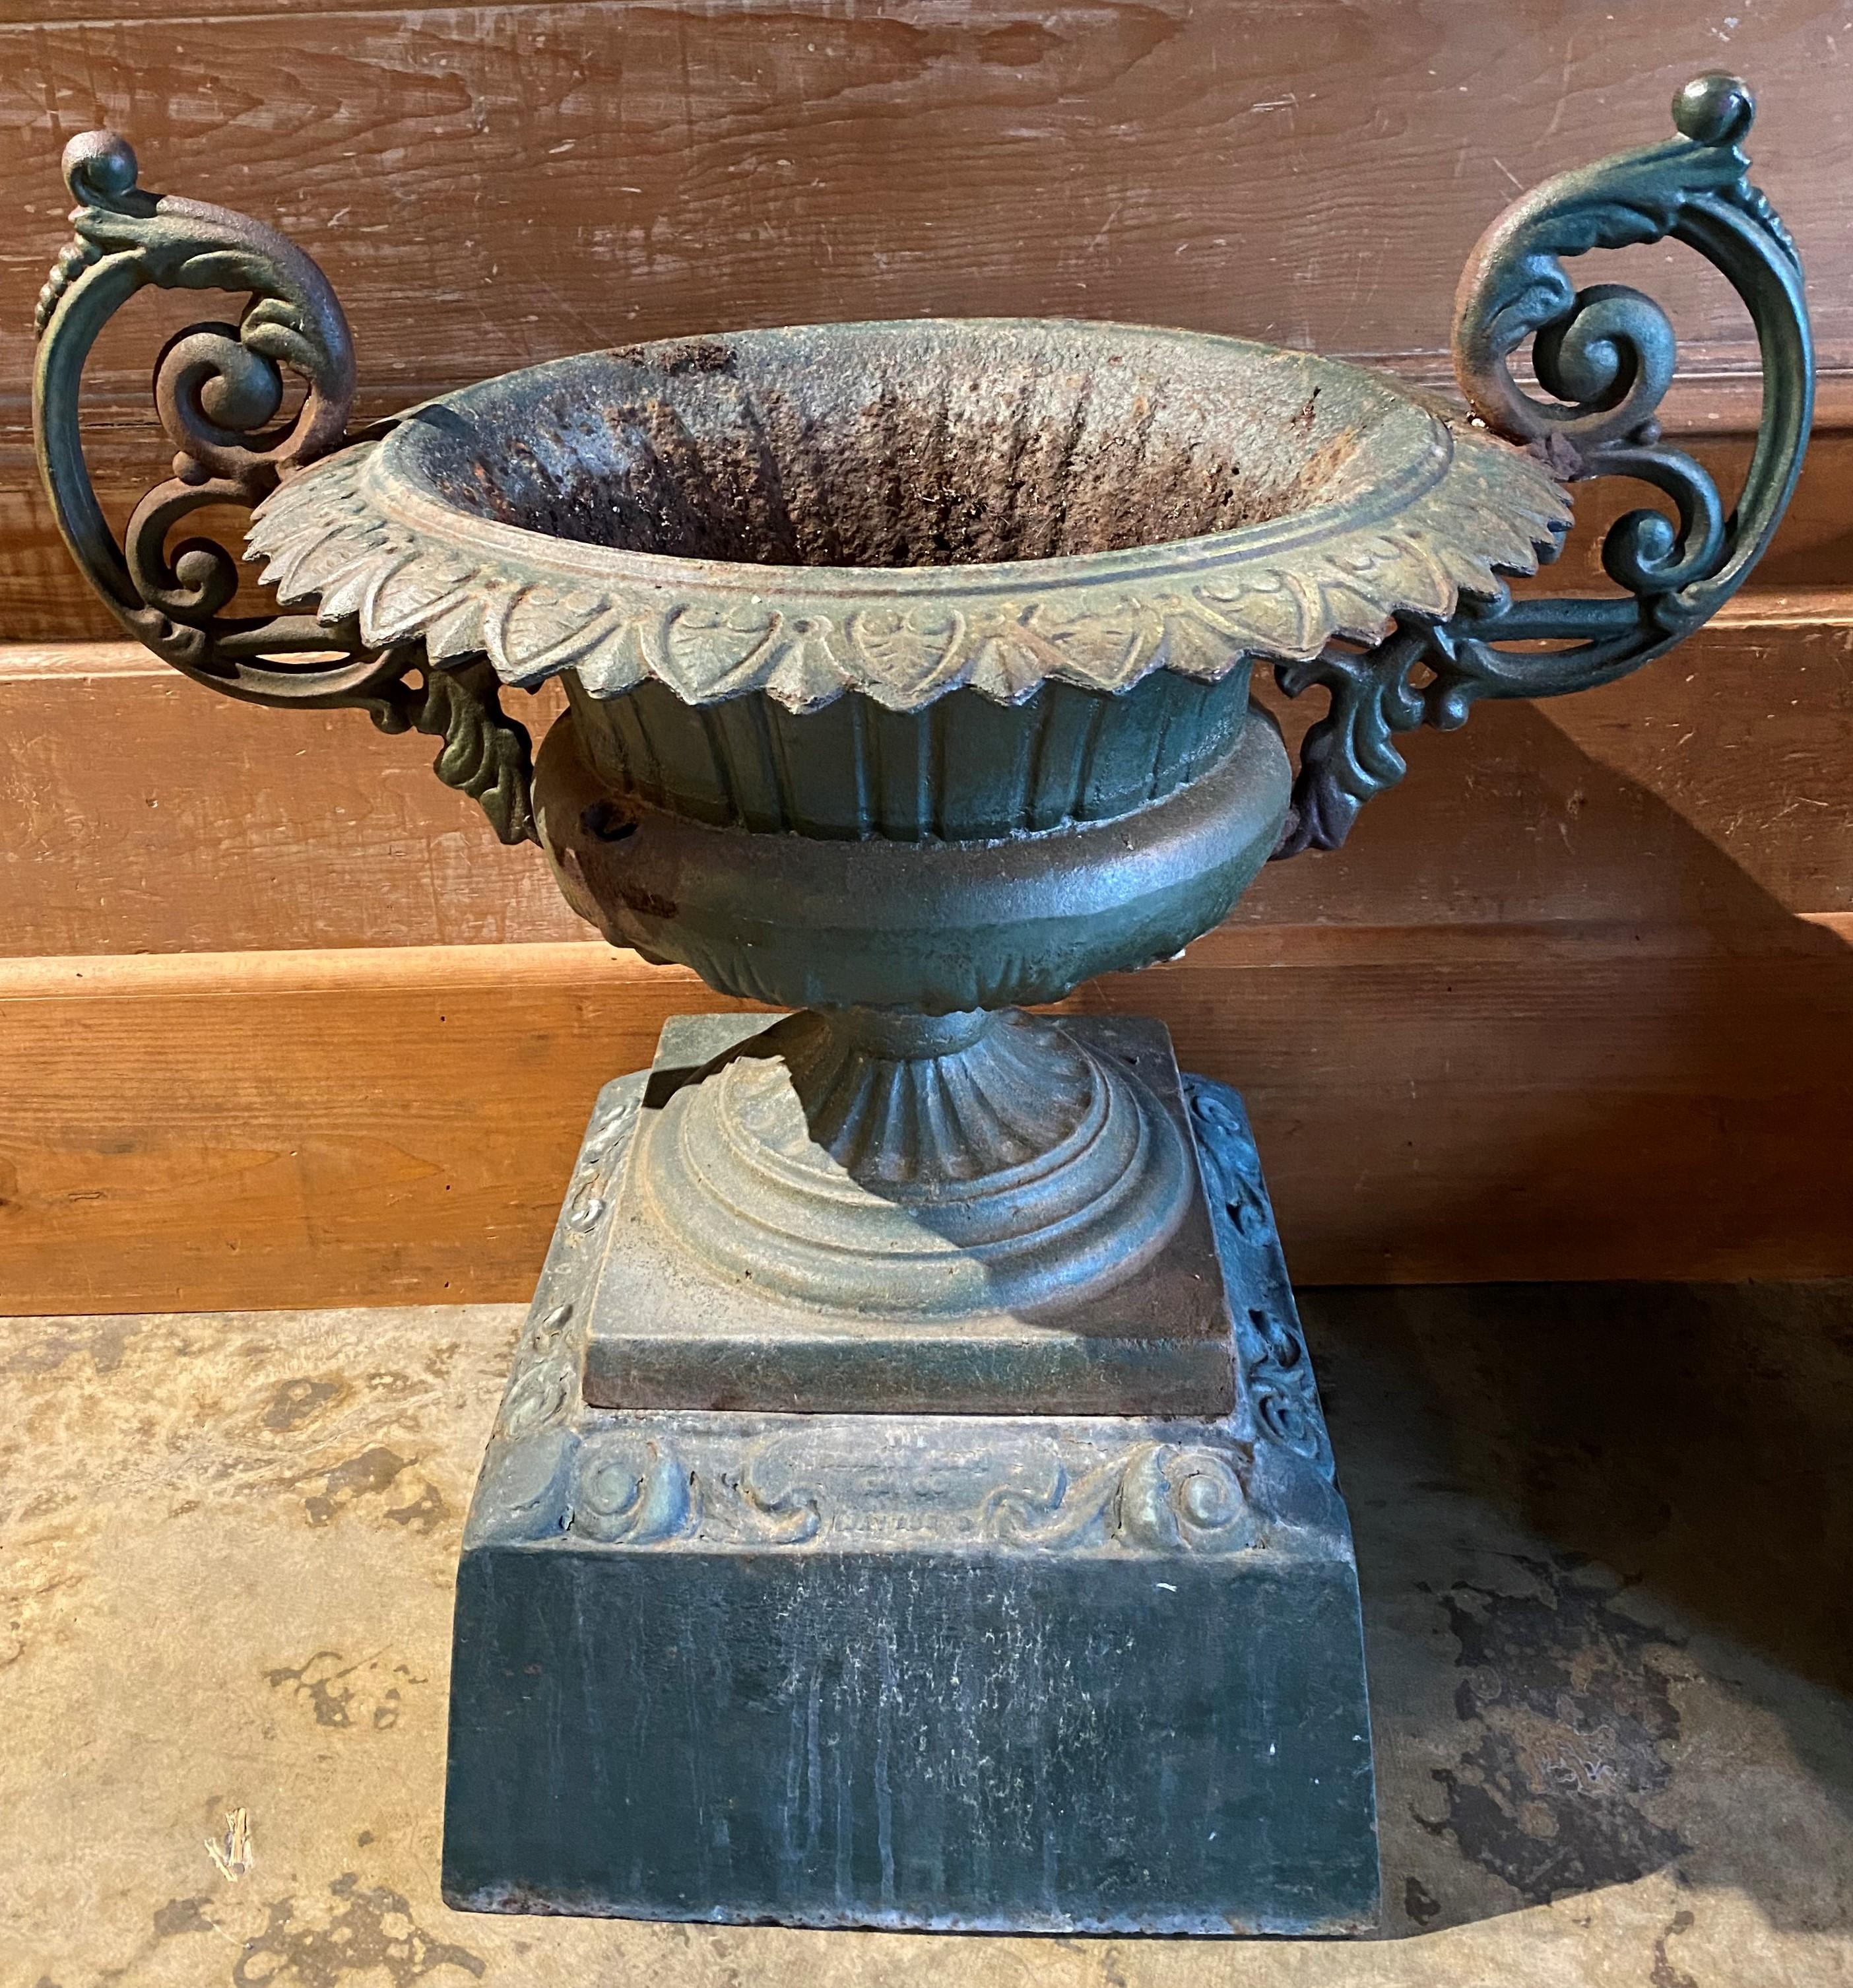 A fine pair of classical form urns with C-scroll handles in old green paint, petal rims, signed “Kramer Bros Fdy Co, Dayton, O,” each urn with separate scroll decorated base. The Kramer Bros Foundry was founded in 1895 in Dayton, Ohio. The pair